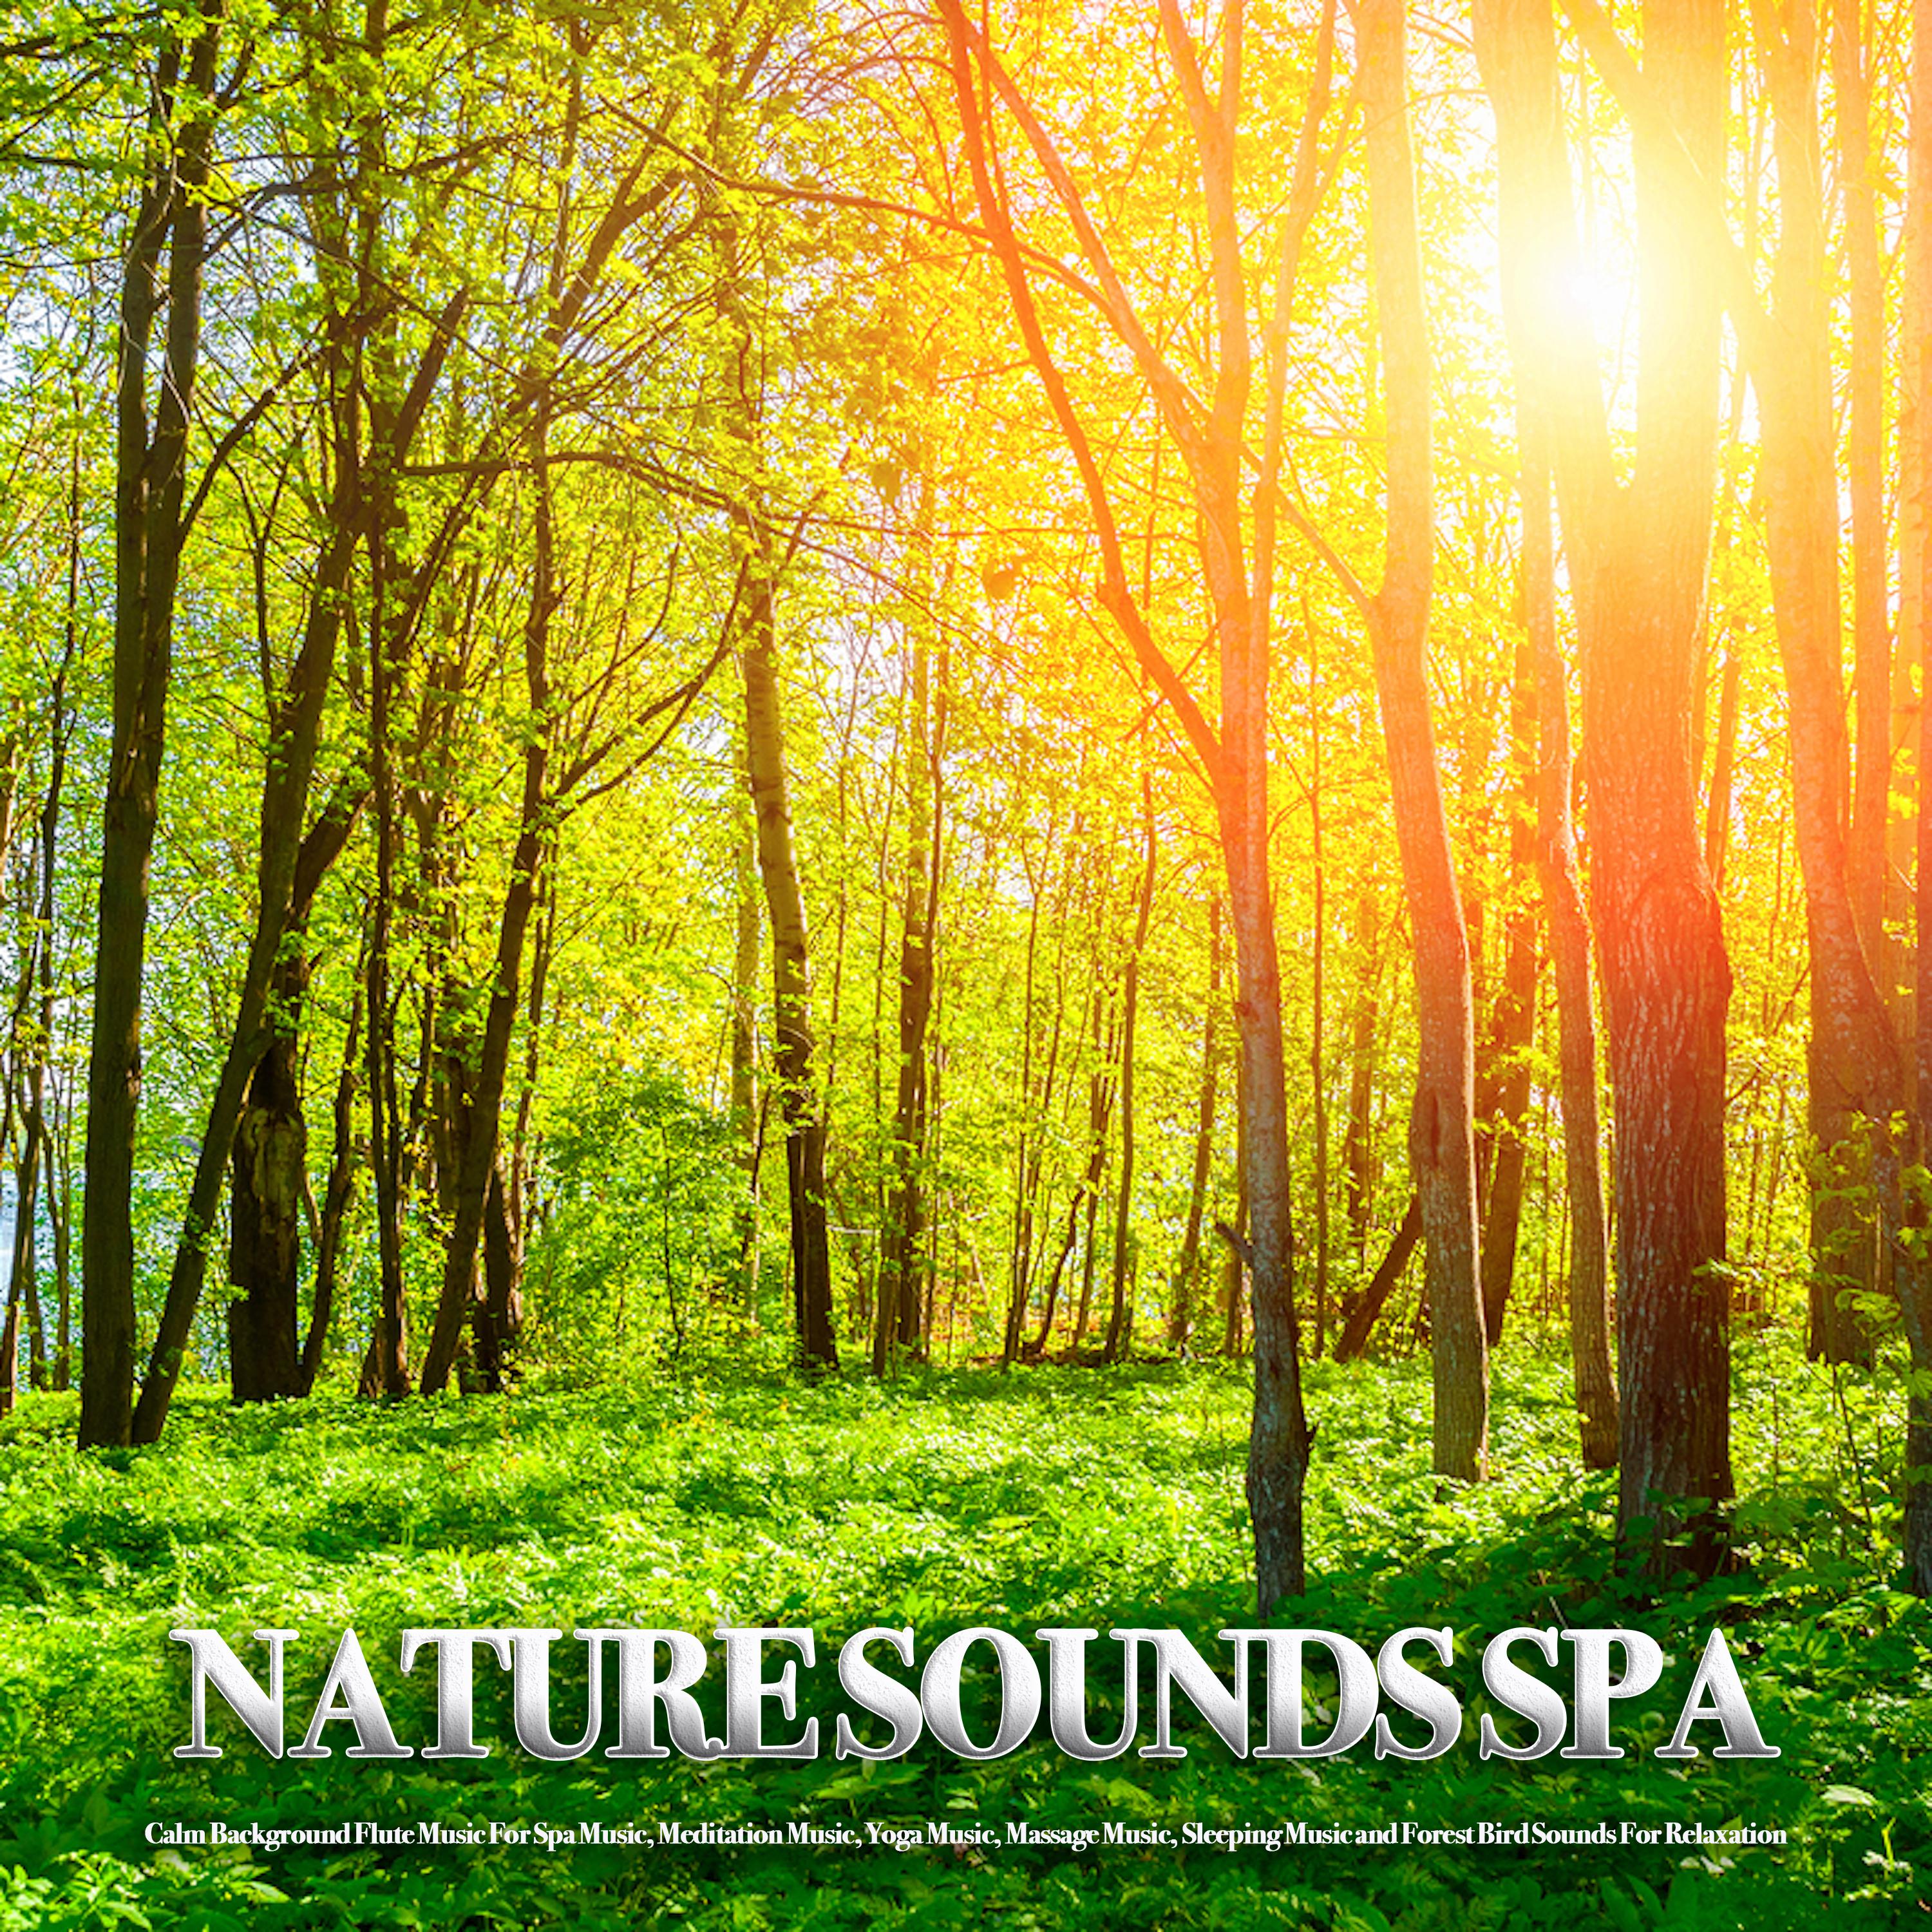 Forest Bird Sounds for Relaxation